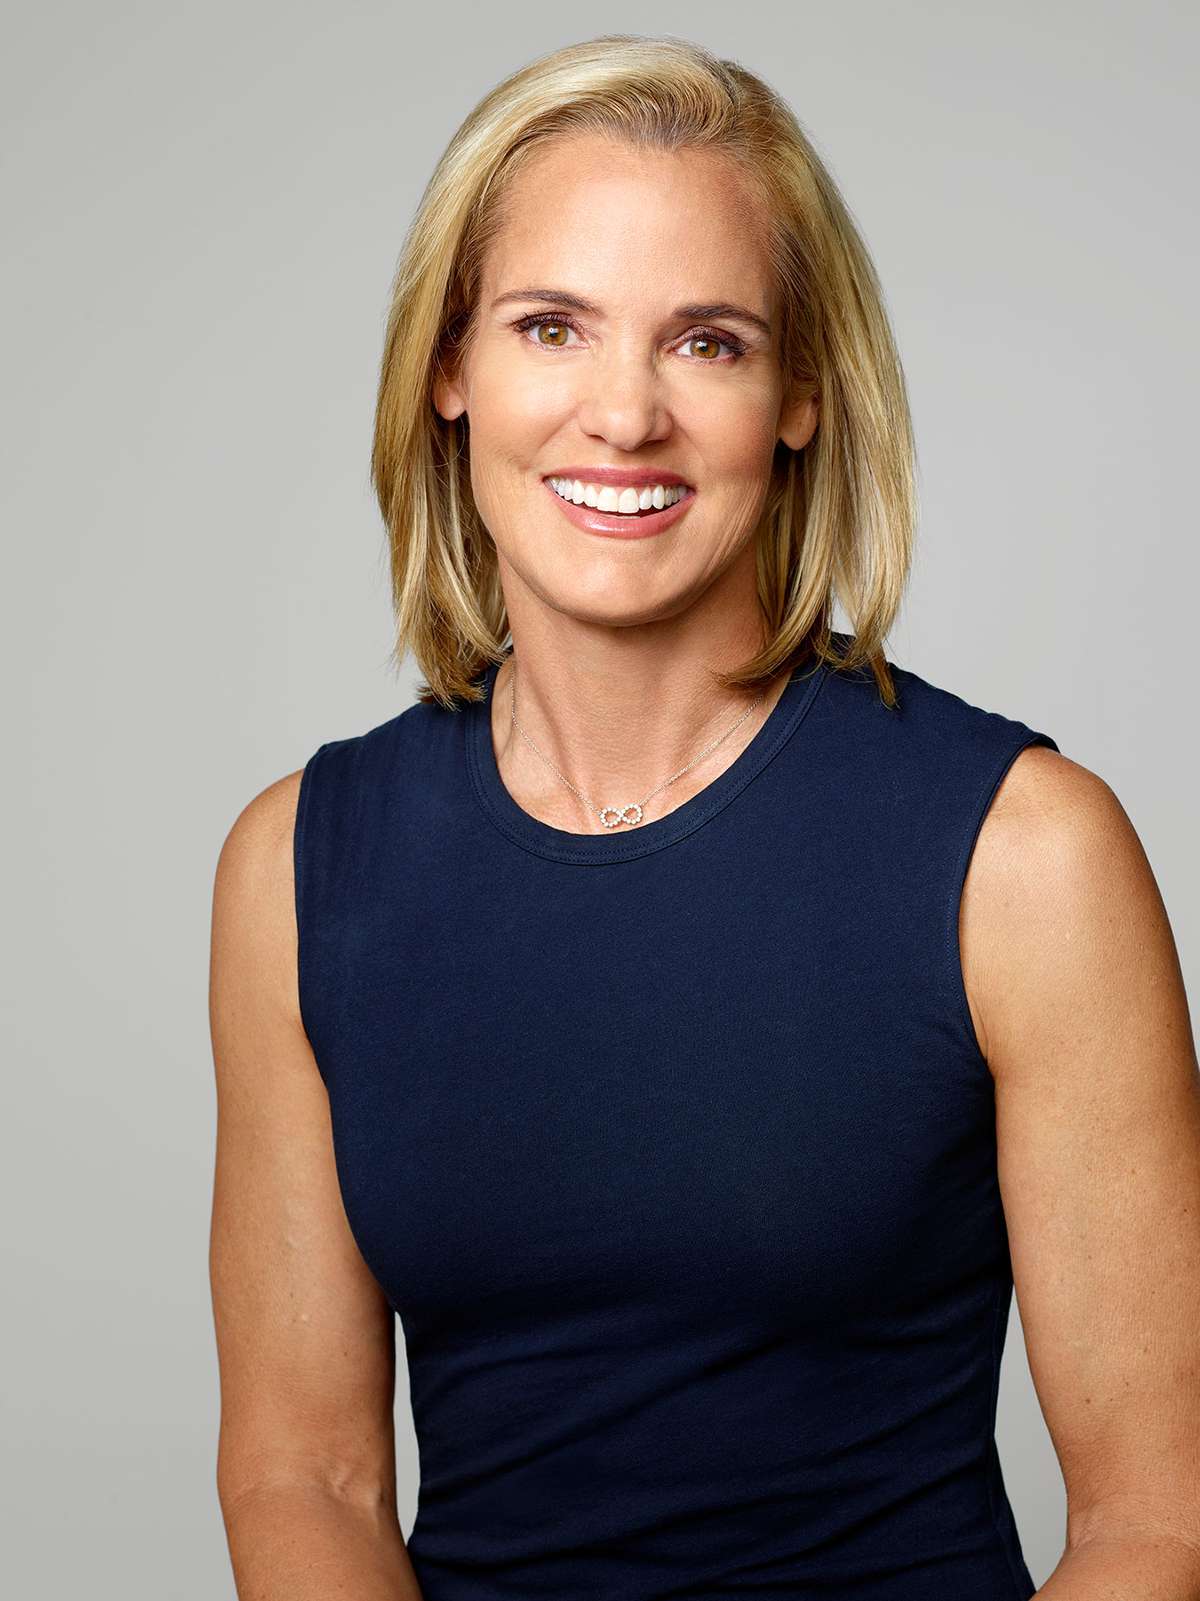 Dara Torres Is 'Ready to Talk' to Her Daughter About Body Confidence After Managing Psoriasis and an Eating Disorder